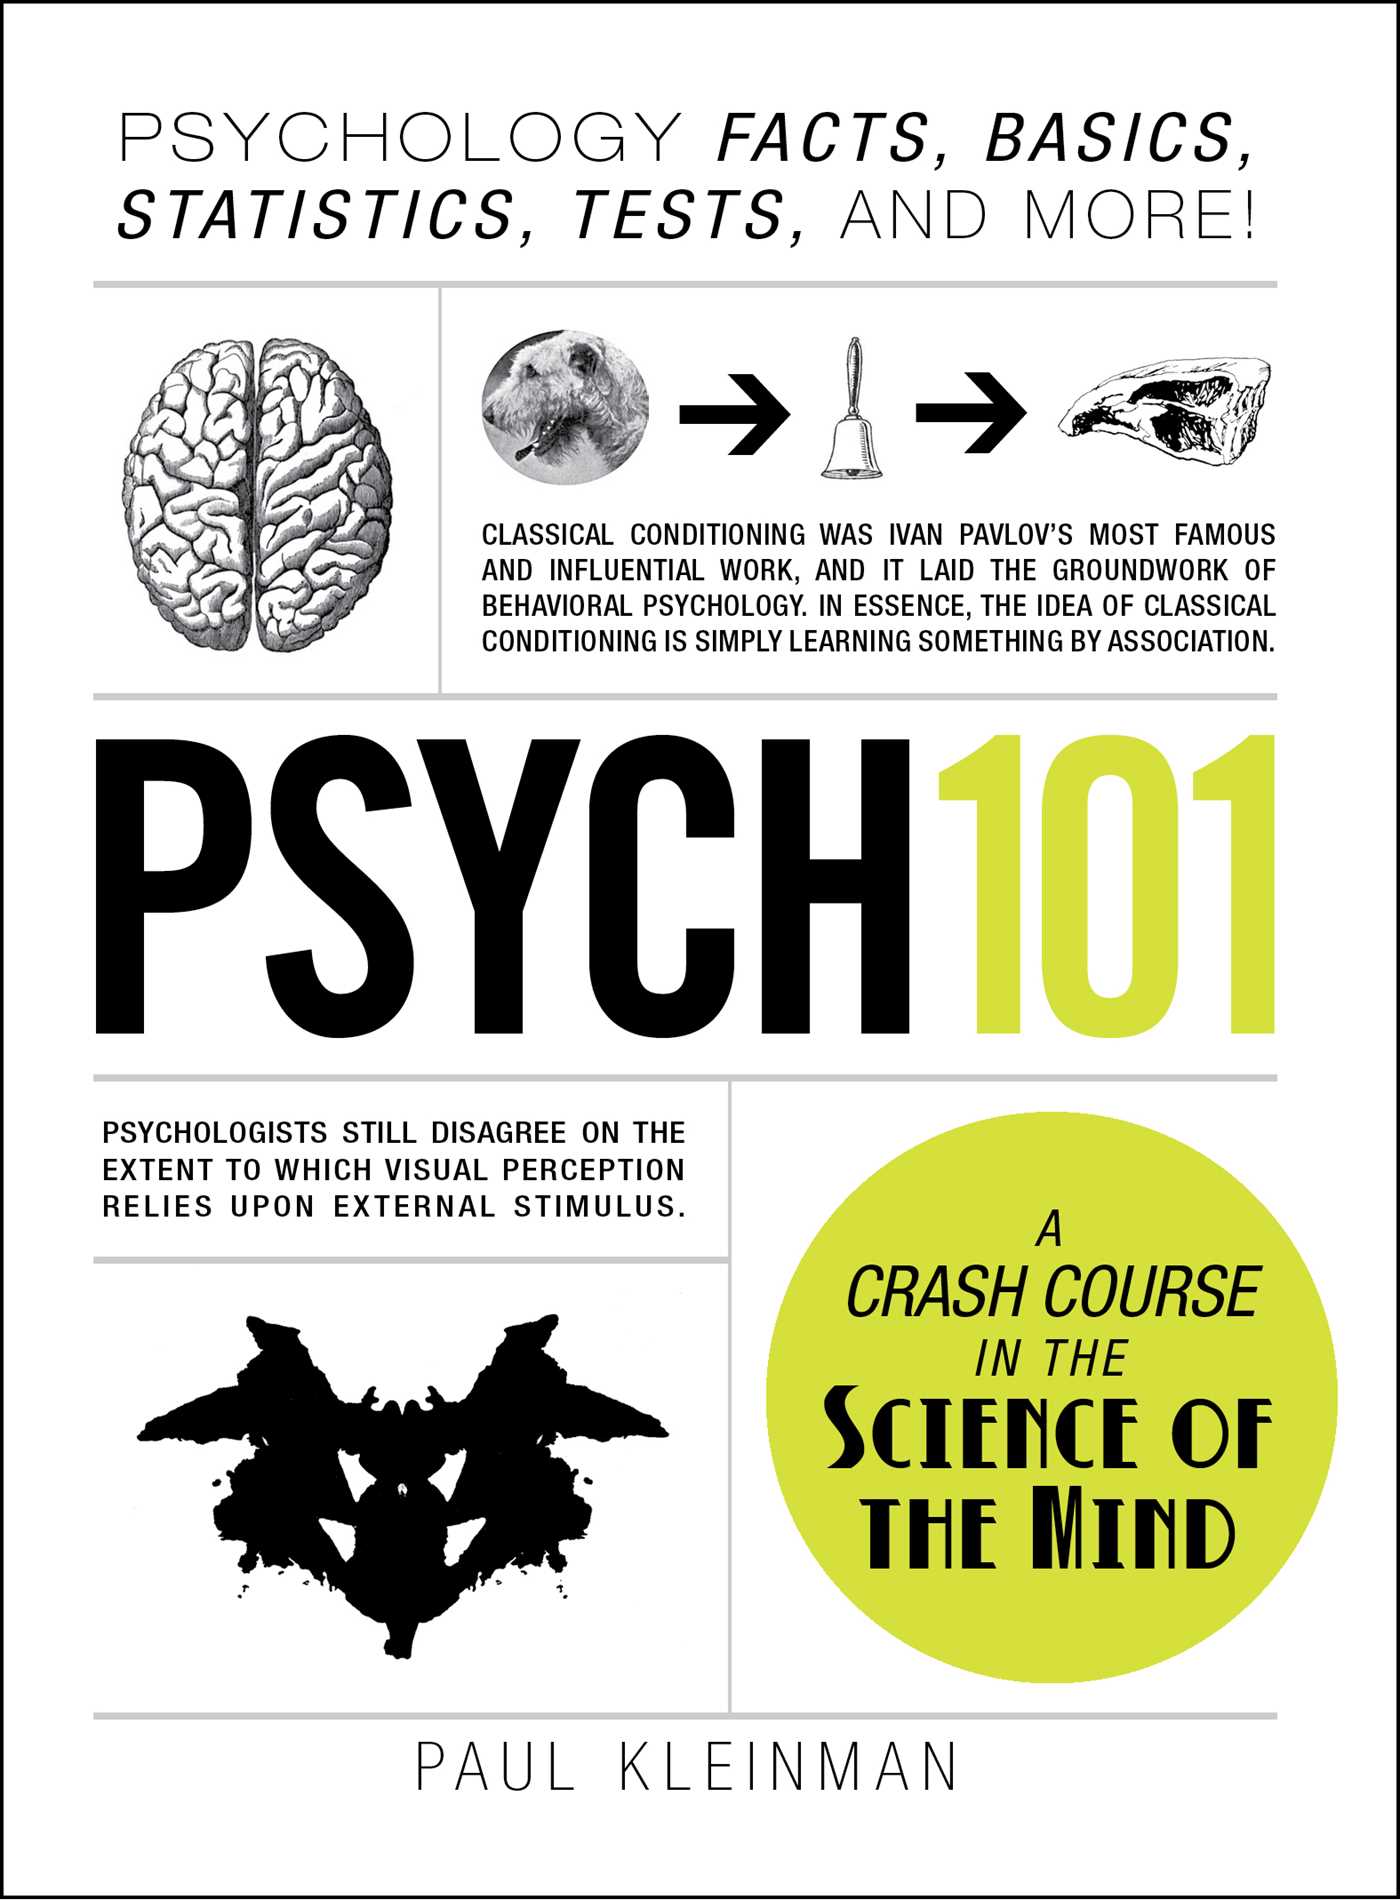 Psych 101 psychology facts, basics, statistics, tests, and more!